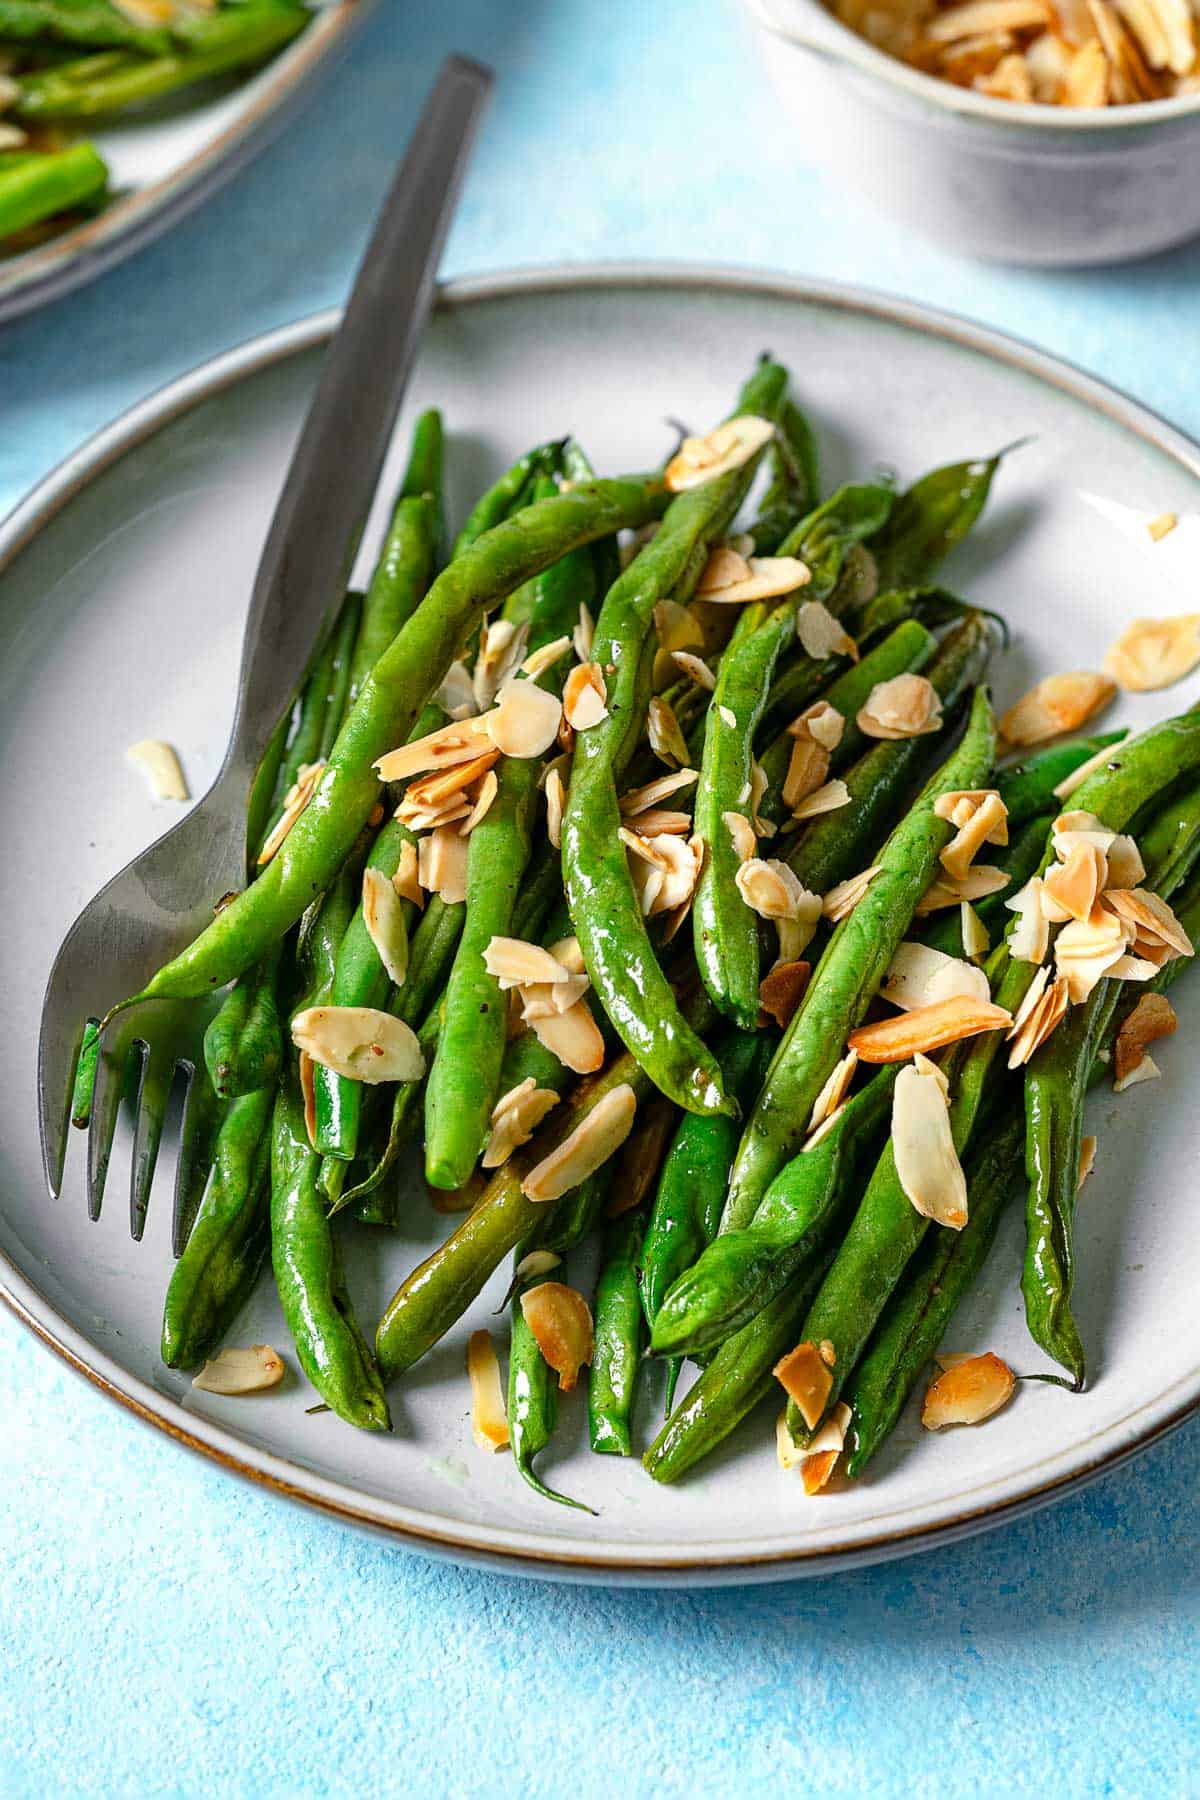 a close up of a serving of roasted green beans garnished with sliced almonds on a plate with a fork.